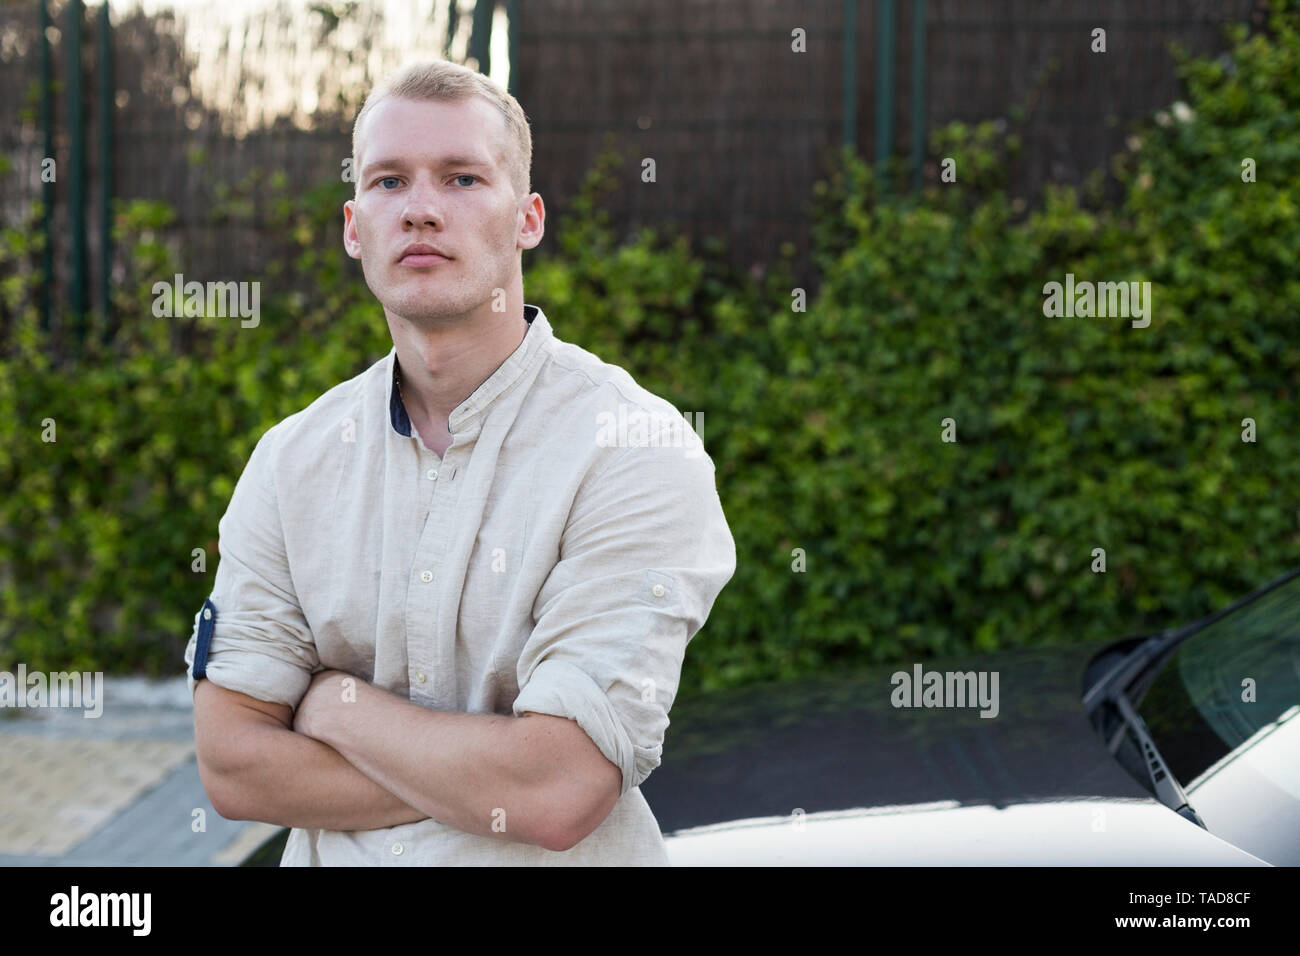 Portrait of young man standing beside car Stock Photo